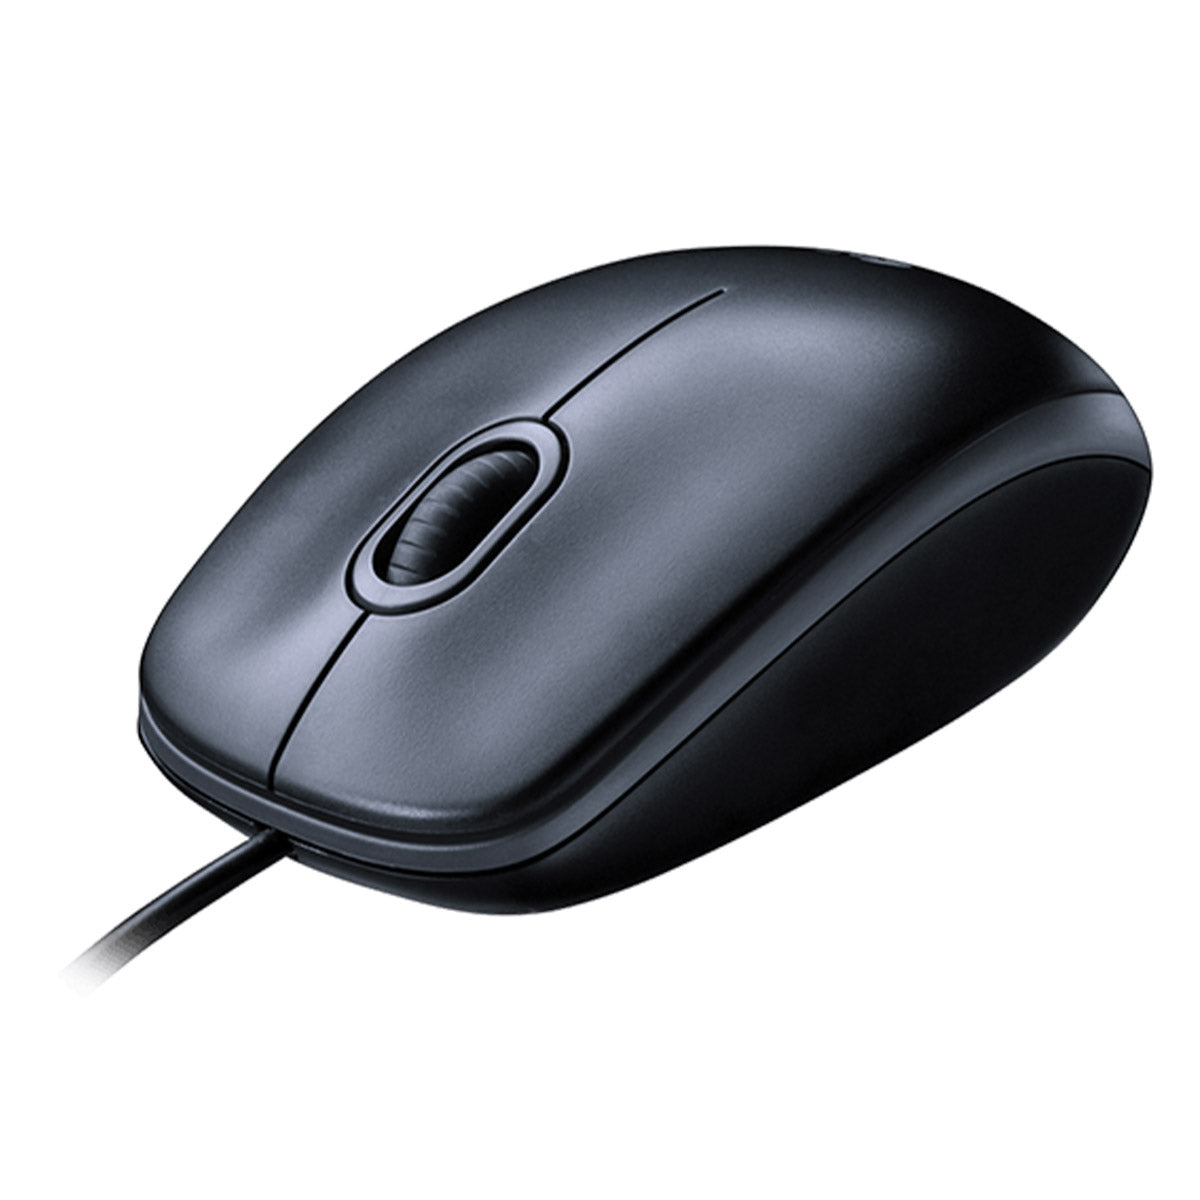 Logitech M90 Wired Optical Mouse with 1000 DPI and Ambidextrous Design